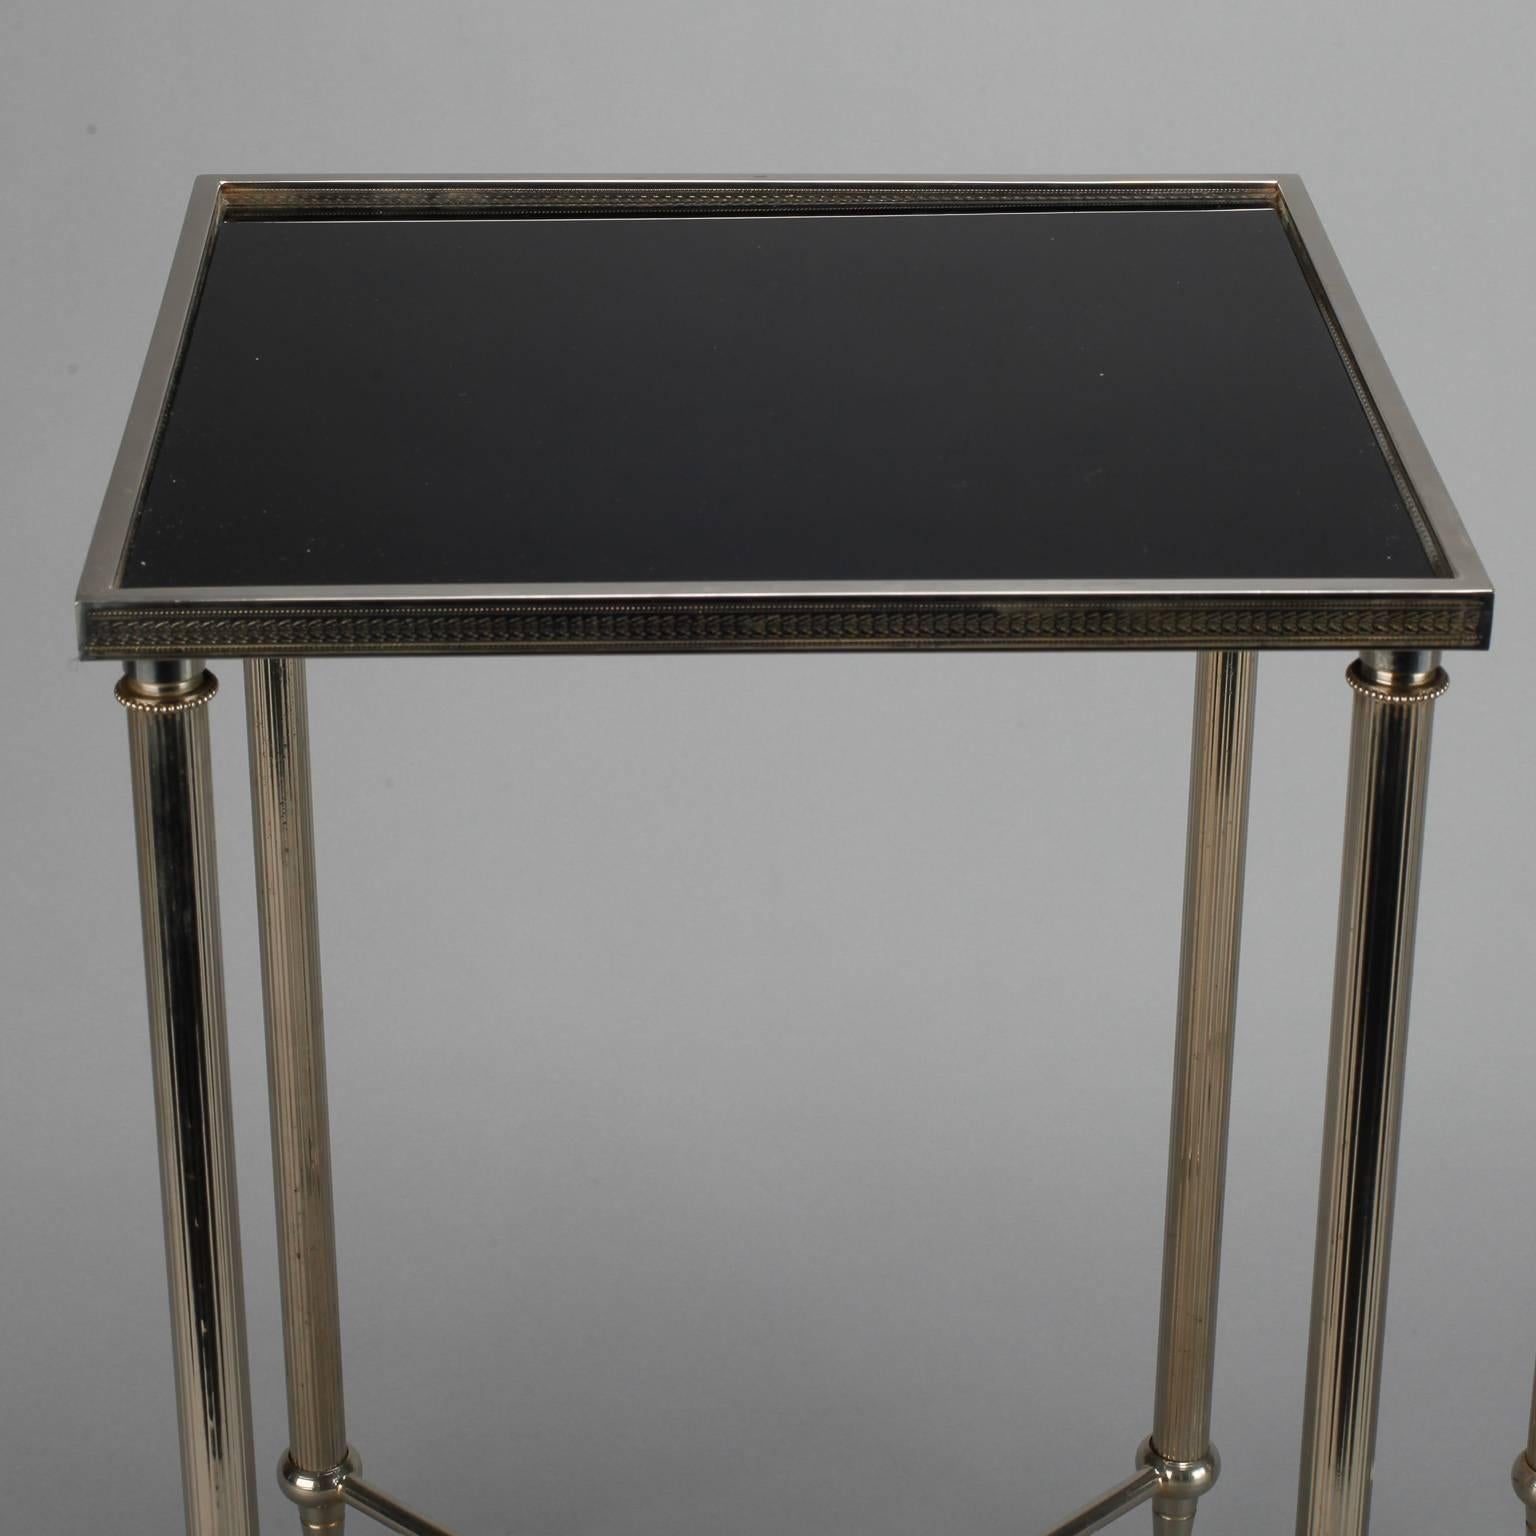 20th Century Pair Metal Tables with X-Form Stretchers and Black Glass Tops